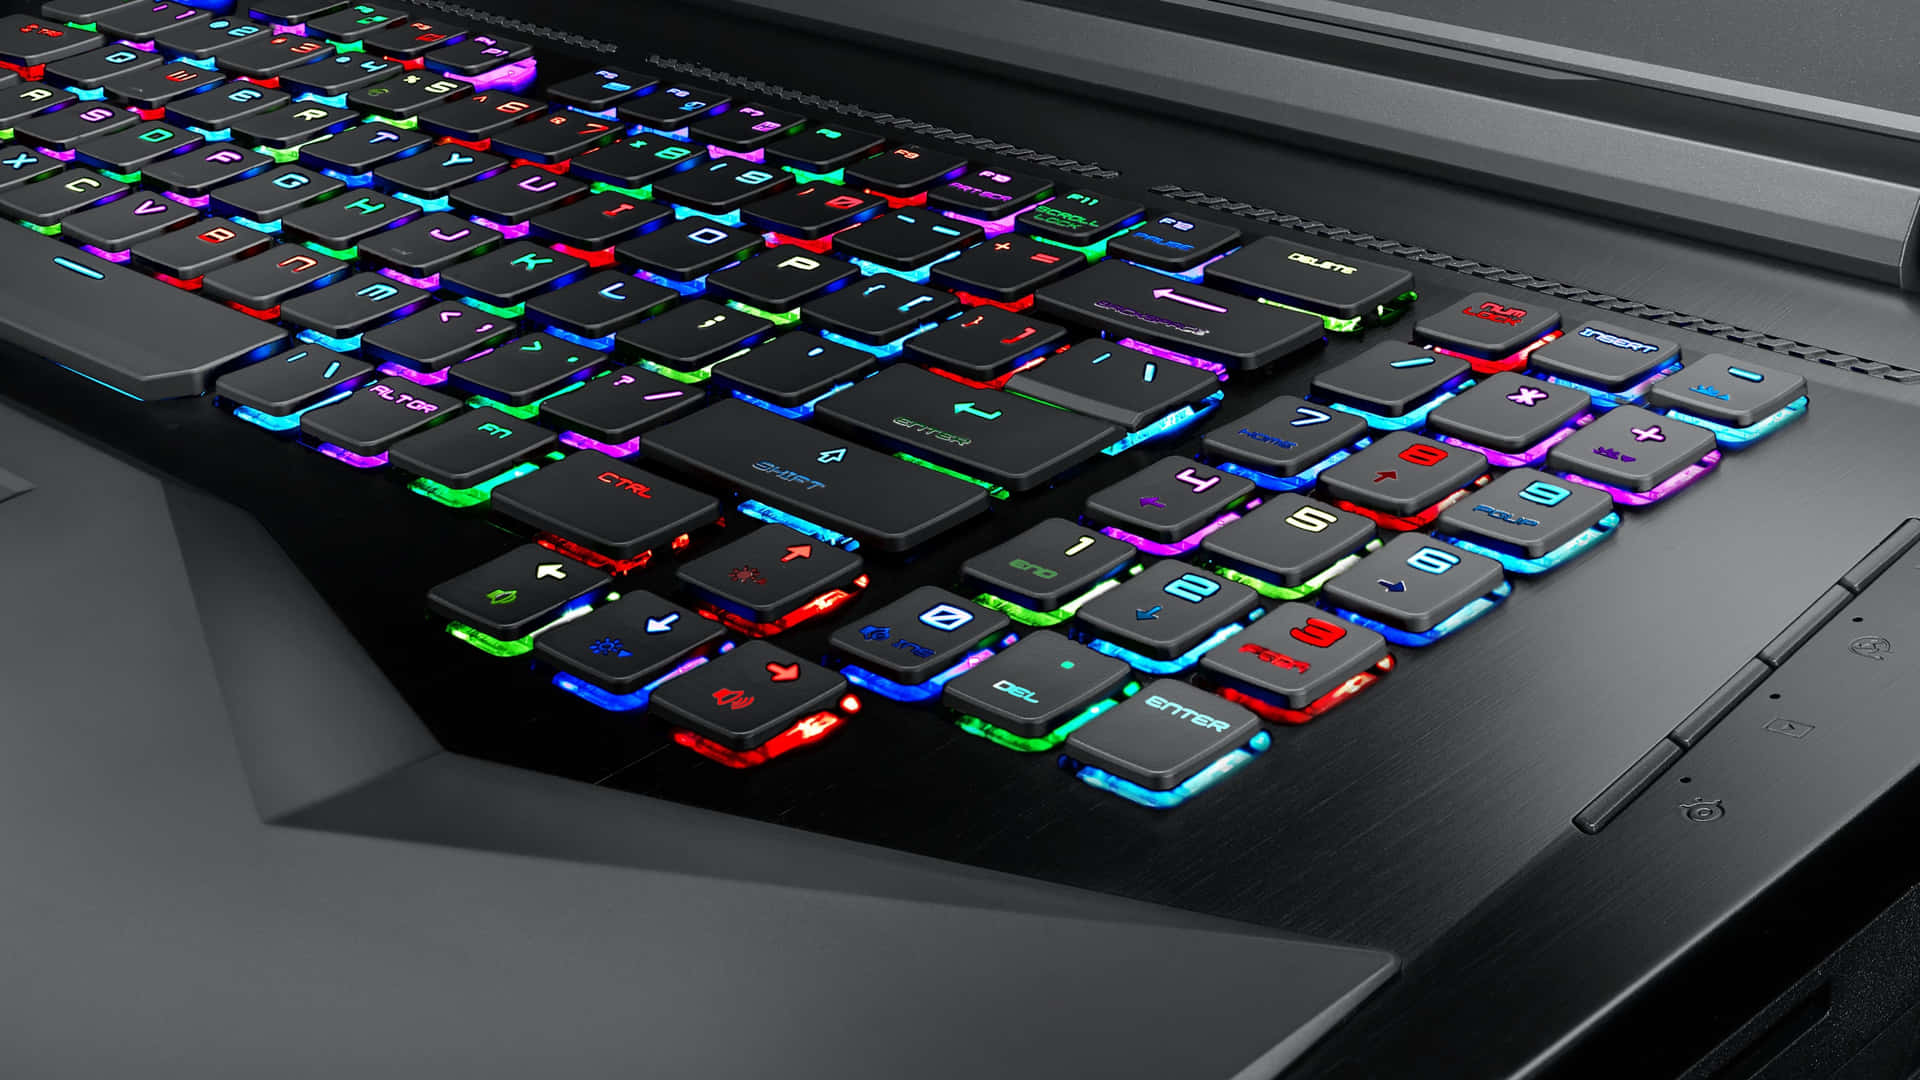 Take your gaming game to the next level with a stylish gaming keyboard Wallpaper